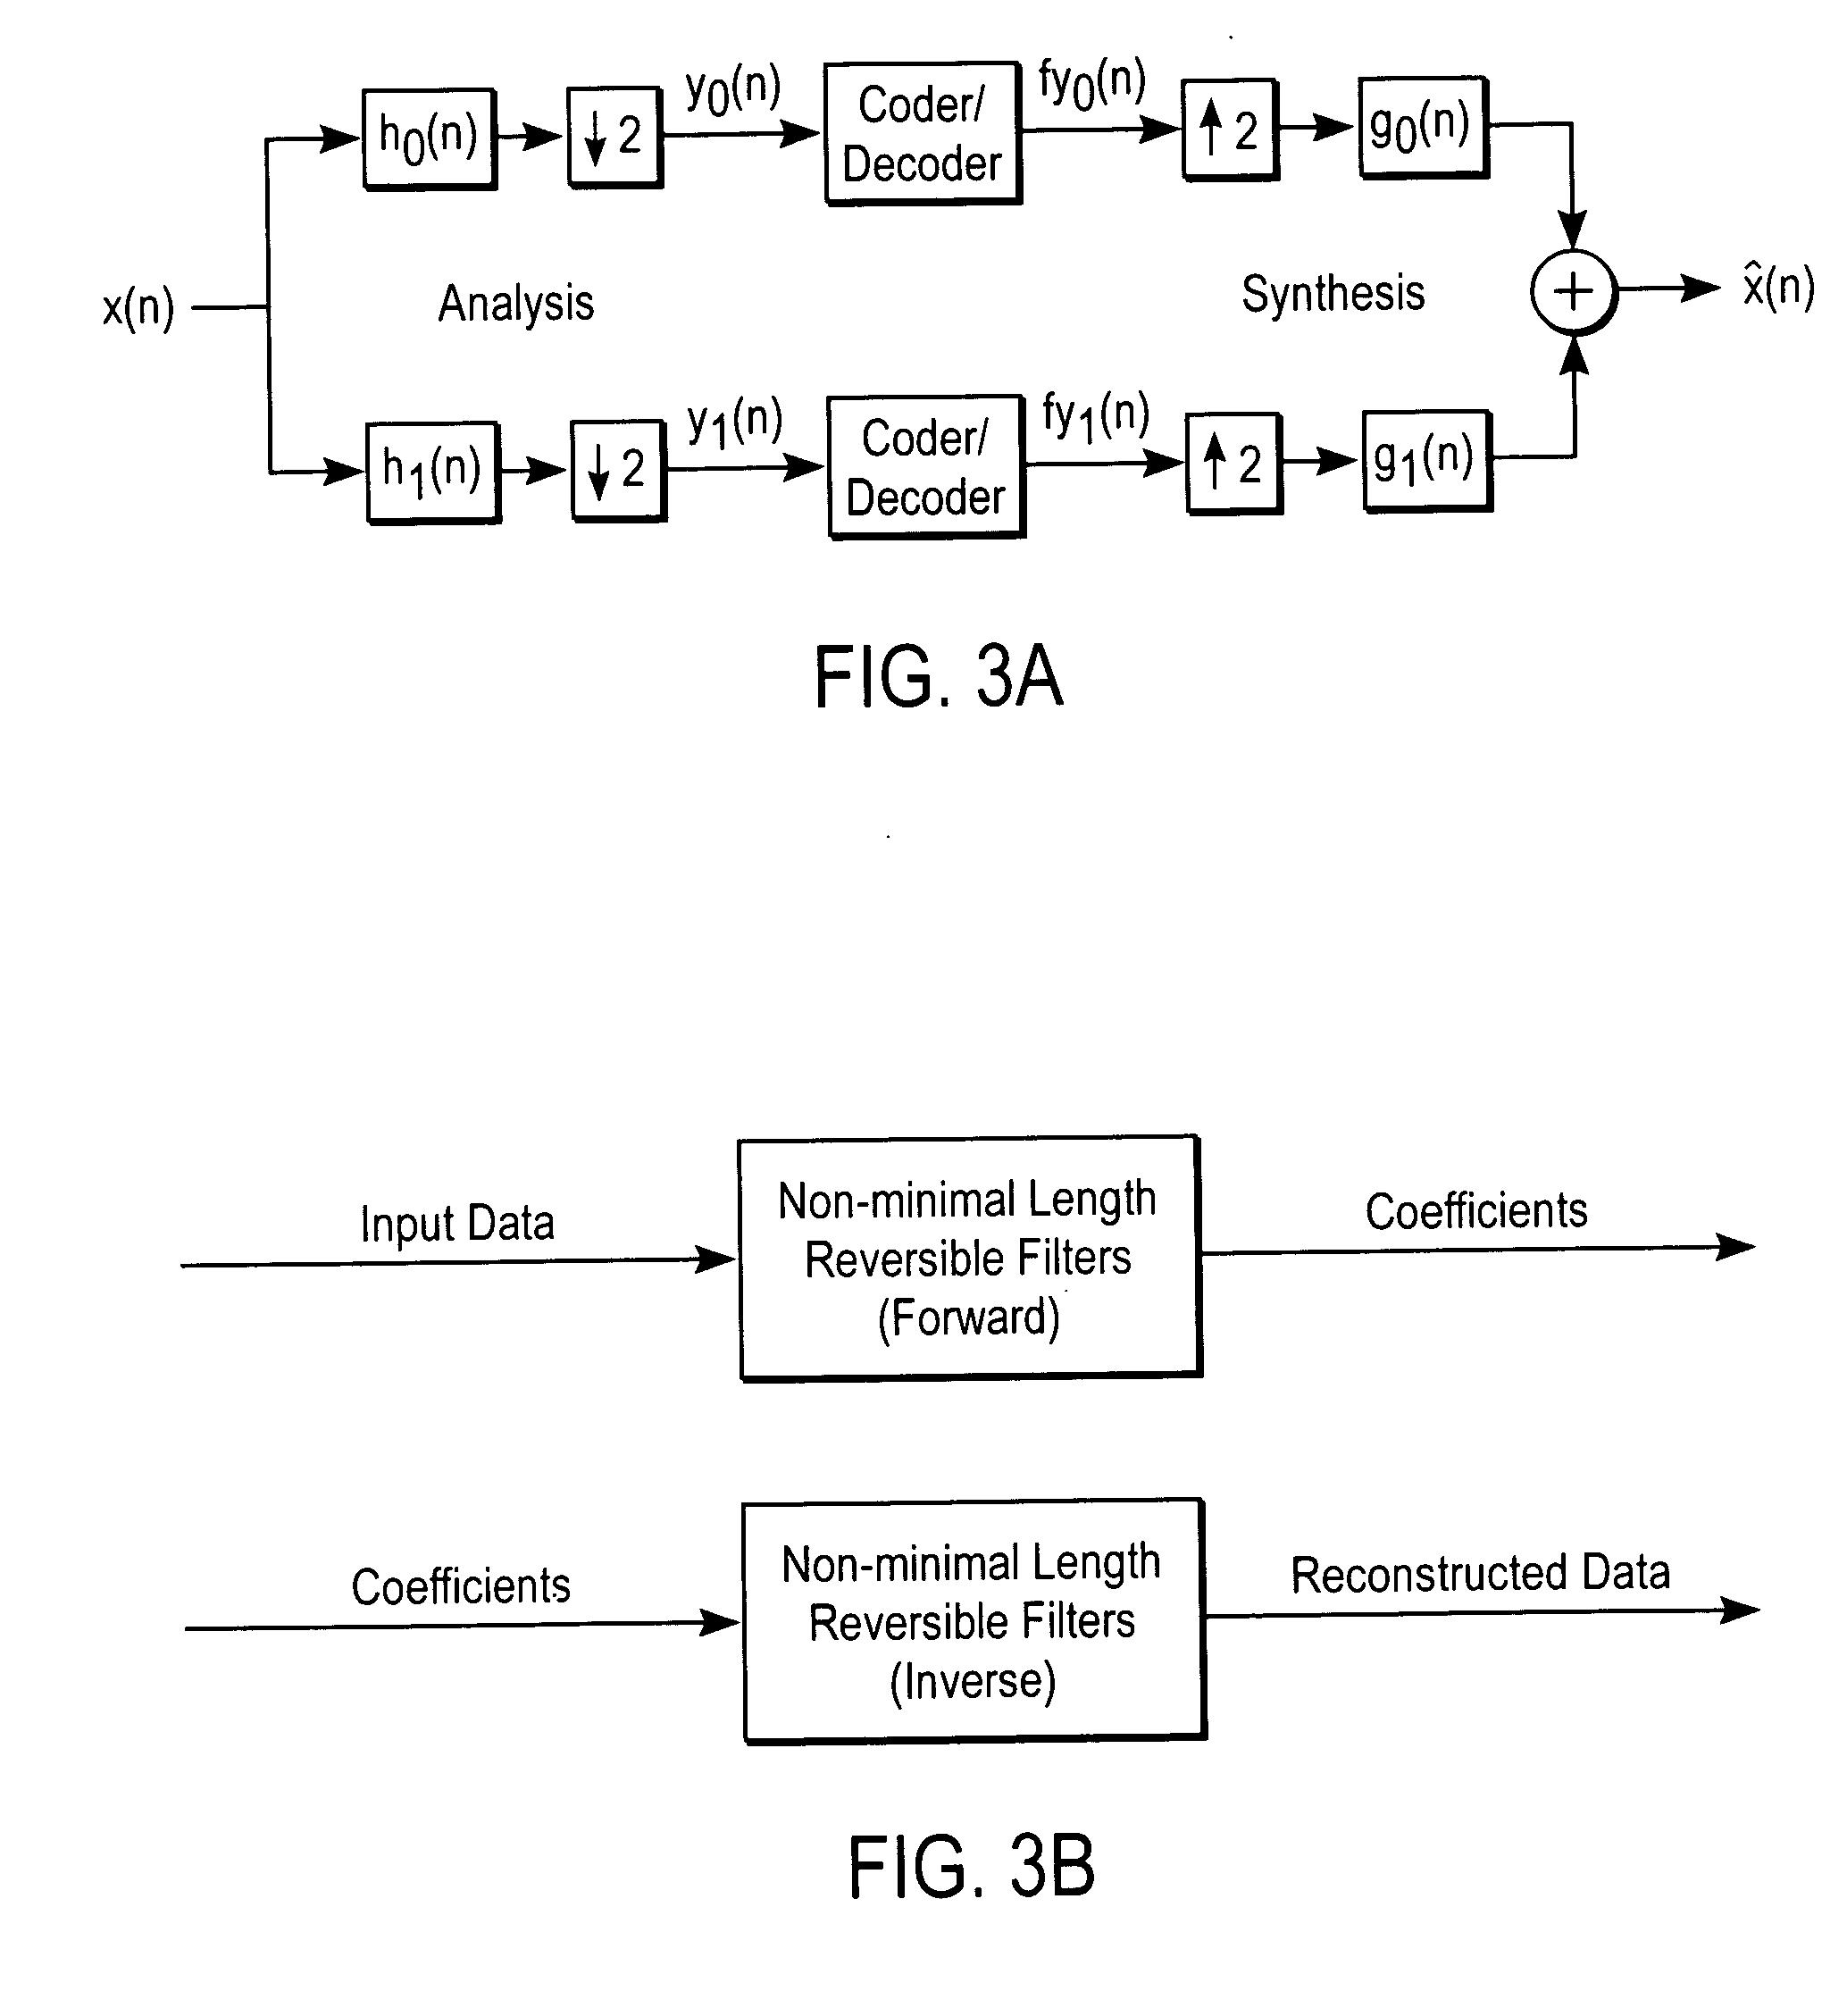 Method and apparatus for compression using reversible wavelet transforms and an embedded codestream